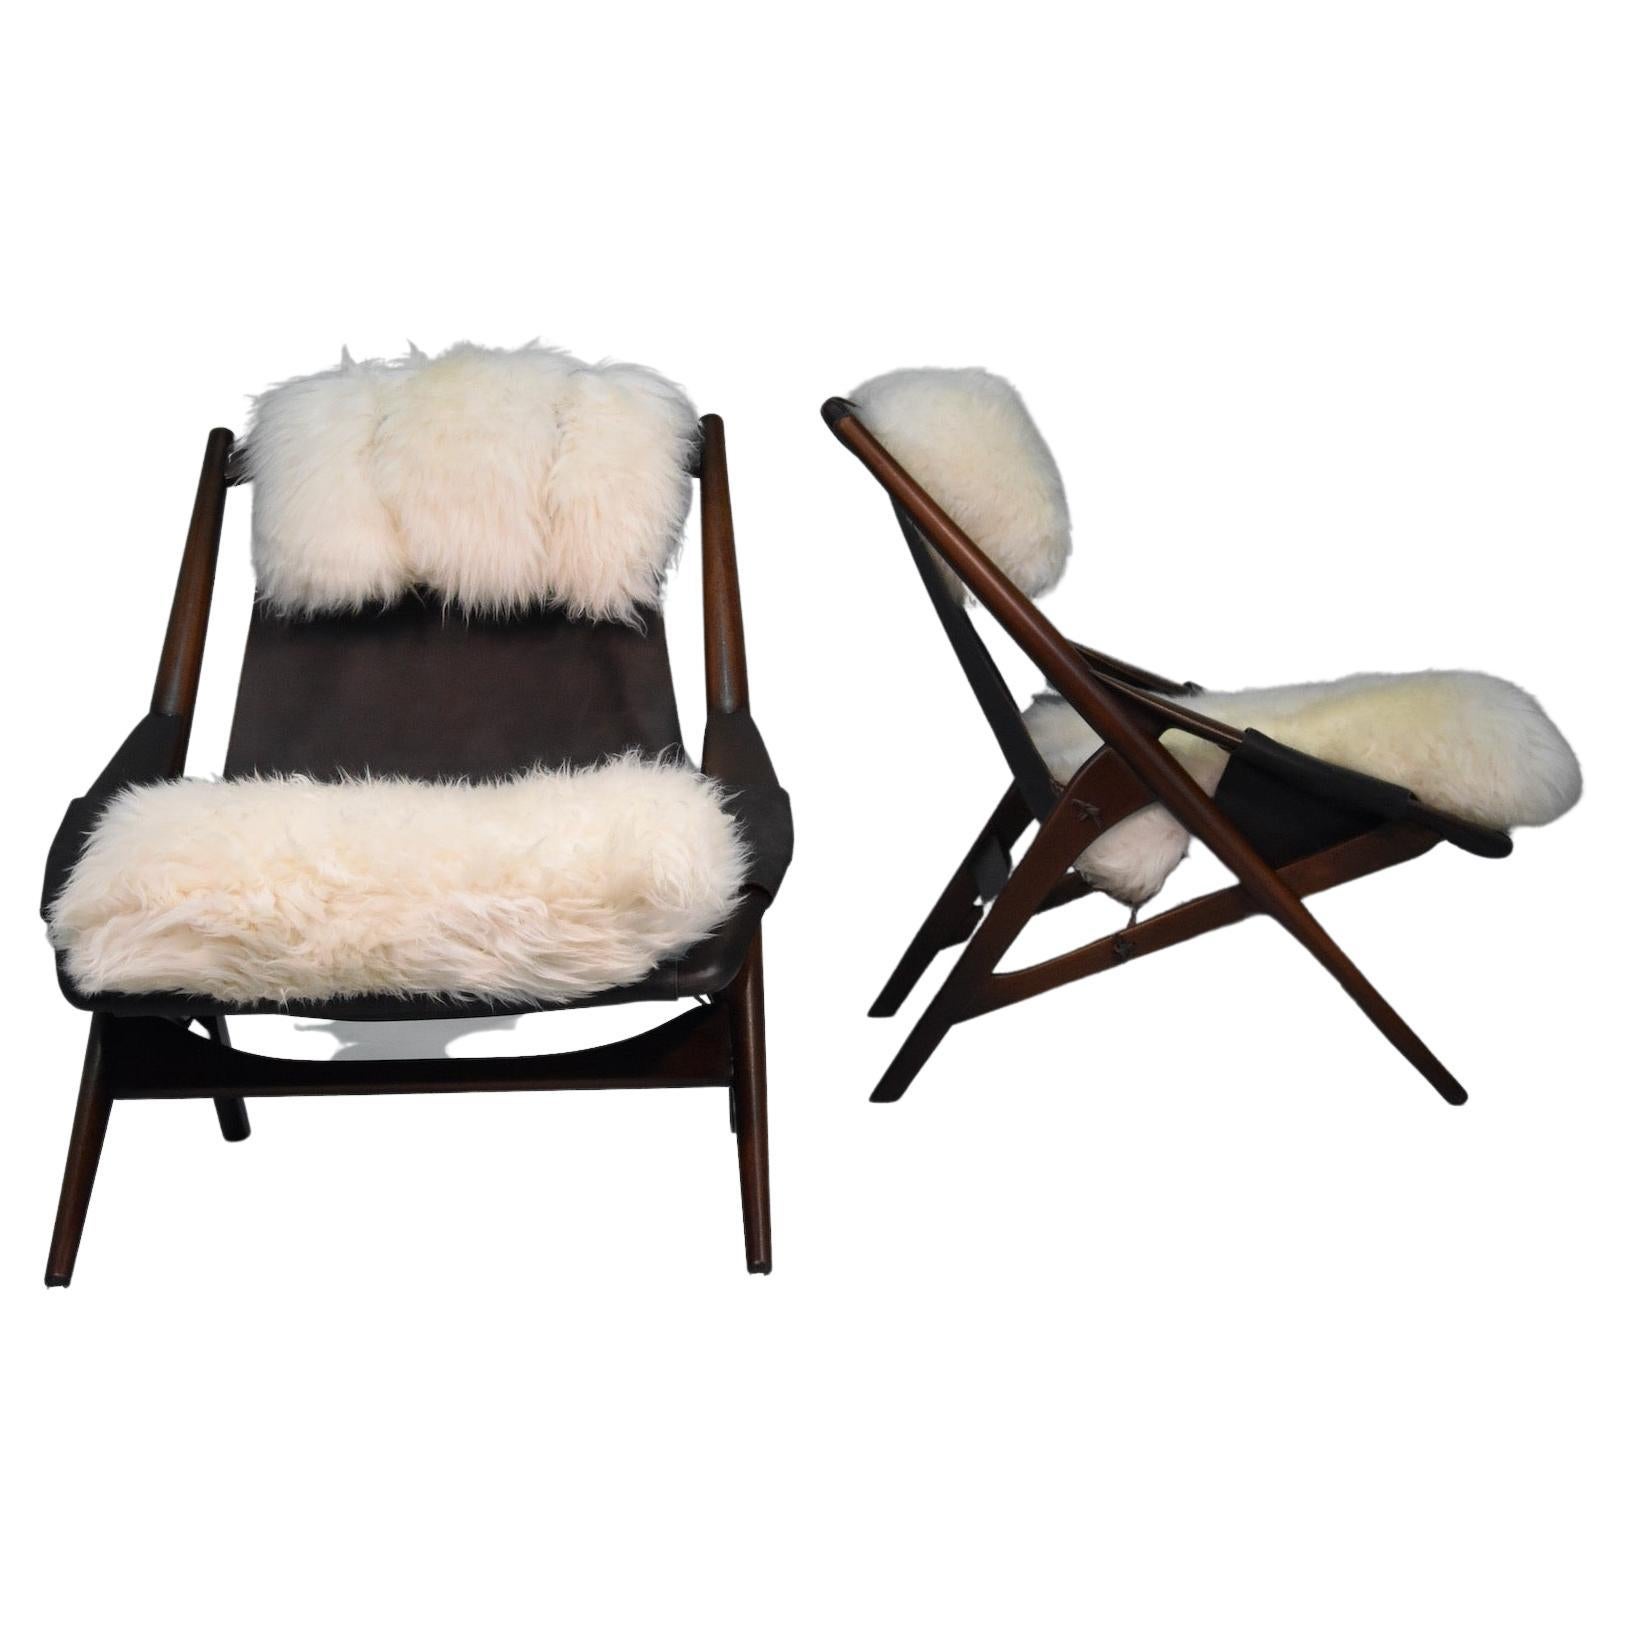 W.D. Andersag Lounge Chair in Leather And Sheepskin